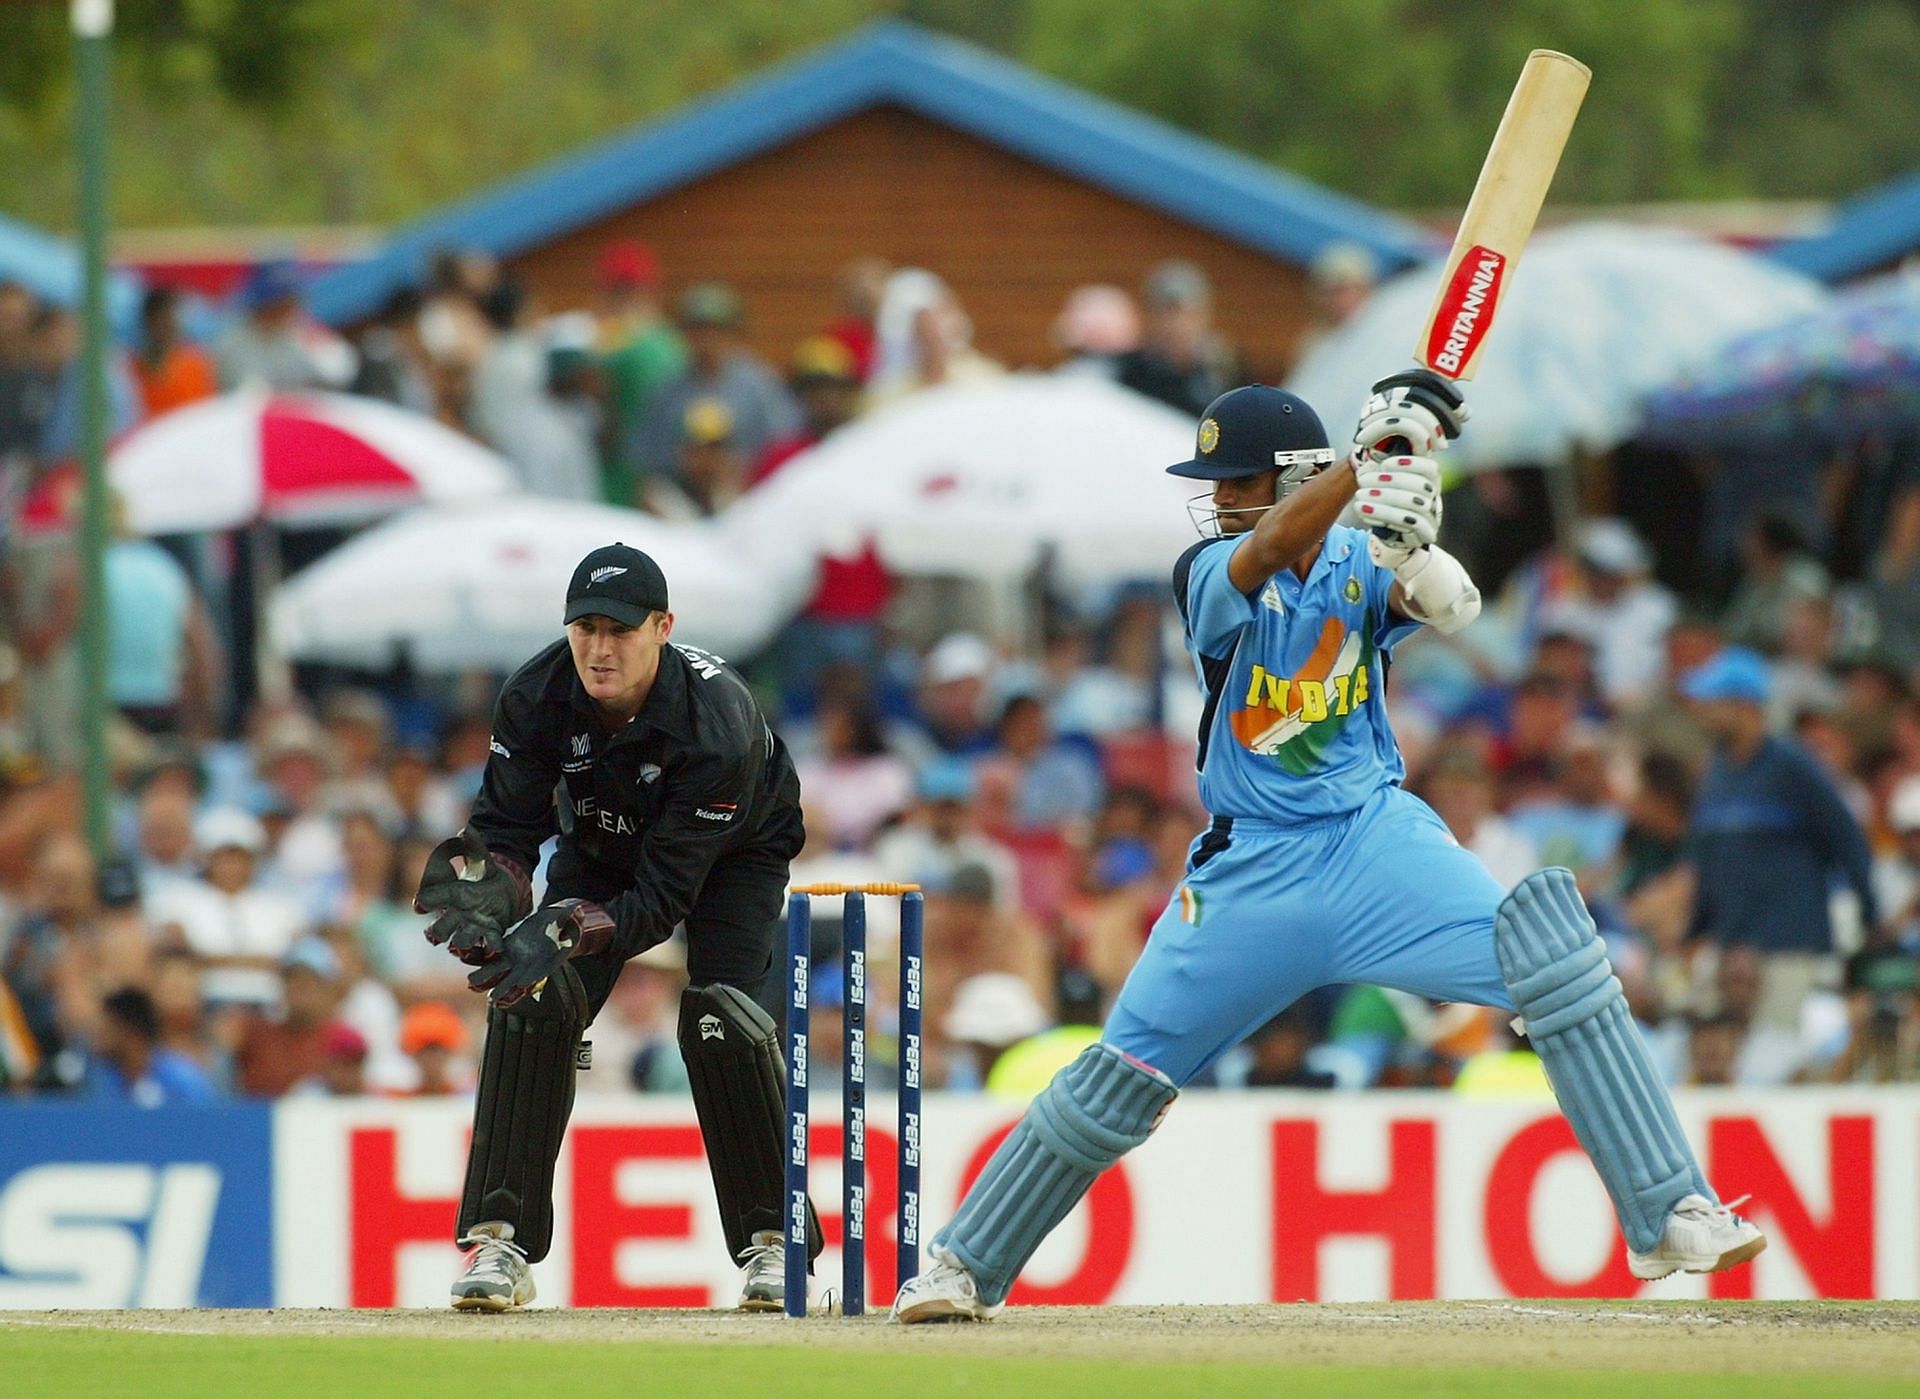 Rahul Dravid of India in action during the 2003 World Cup [Pic Credit: Getty Images]